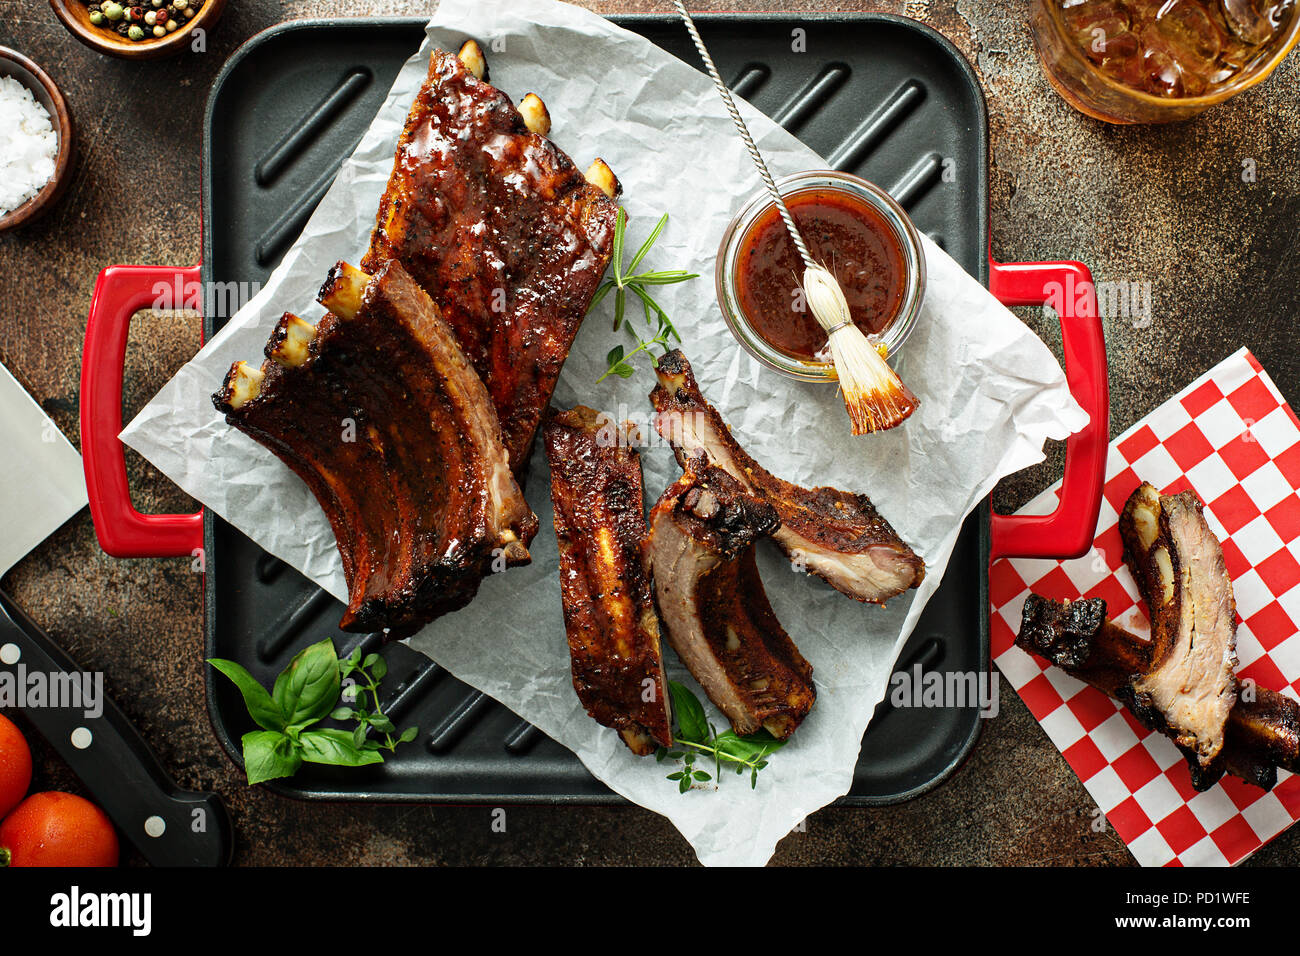 Grilled ribs with barbeque sauce Stock Photo